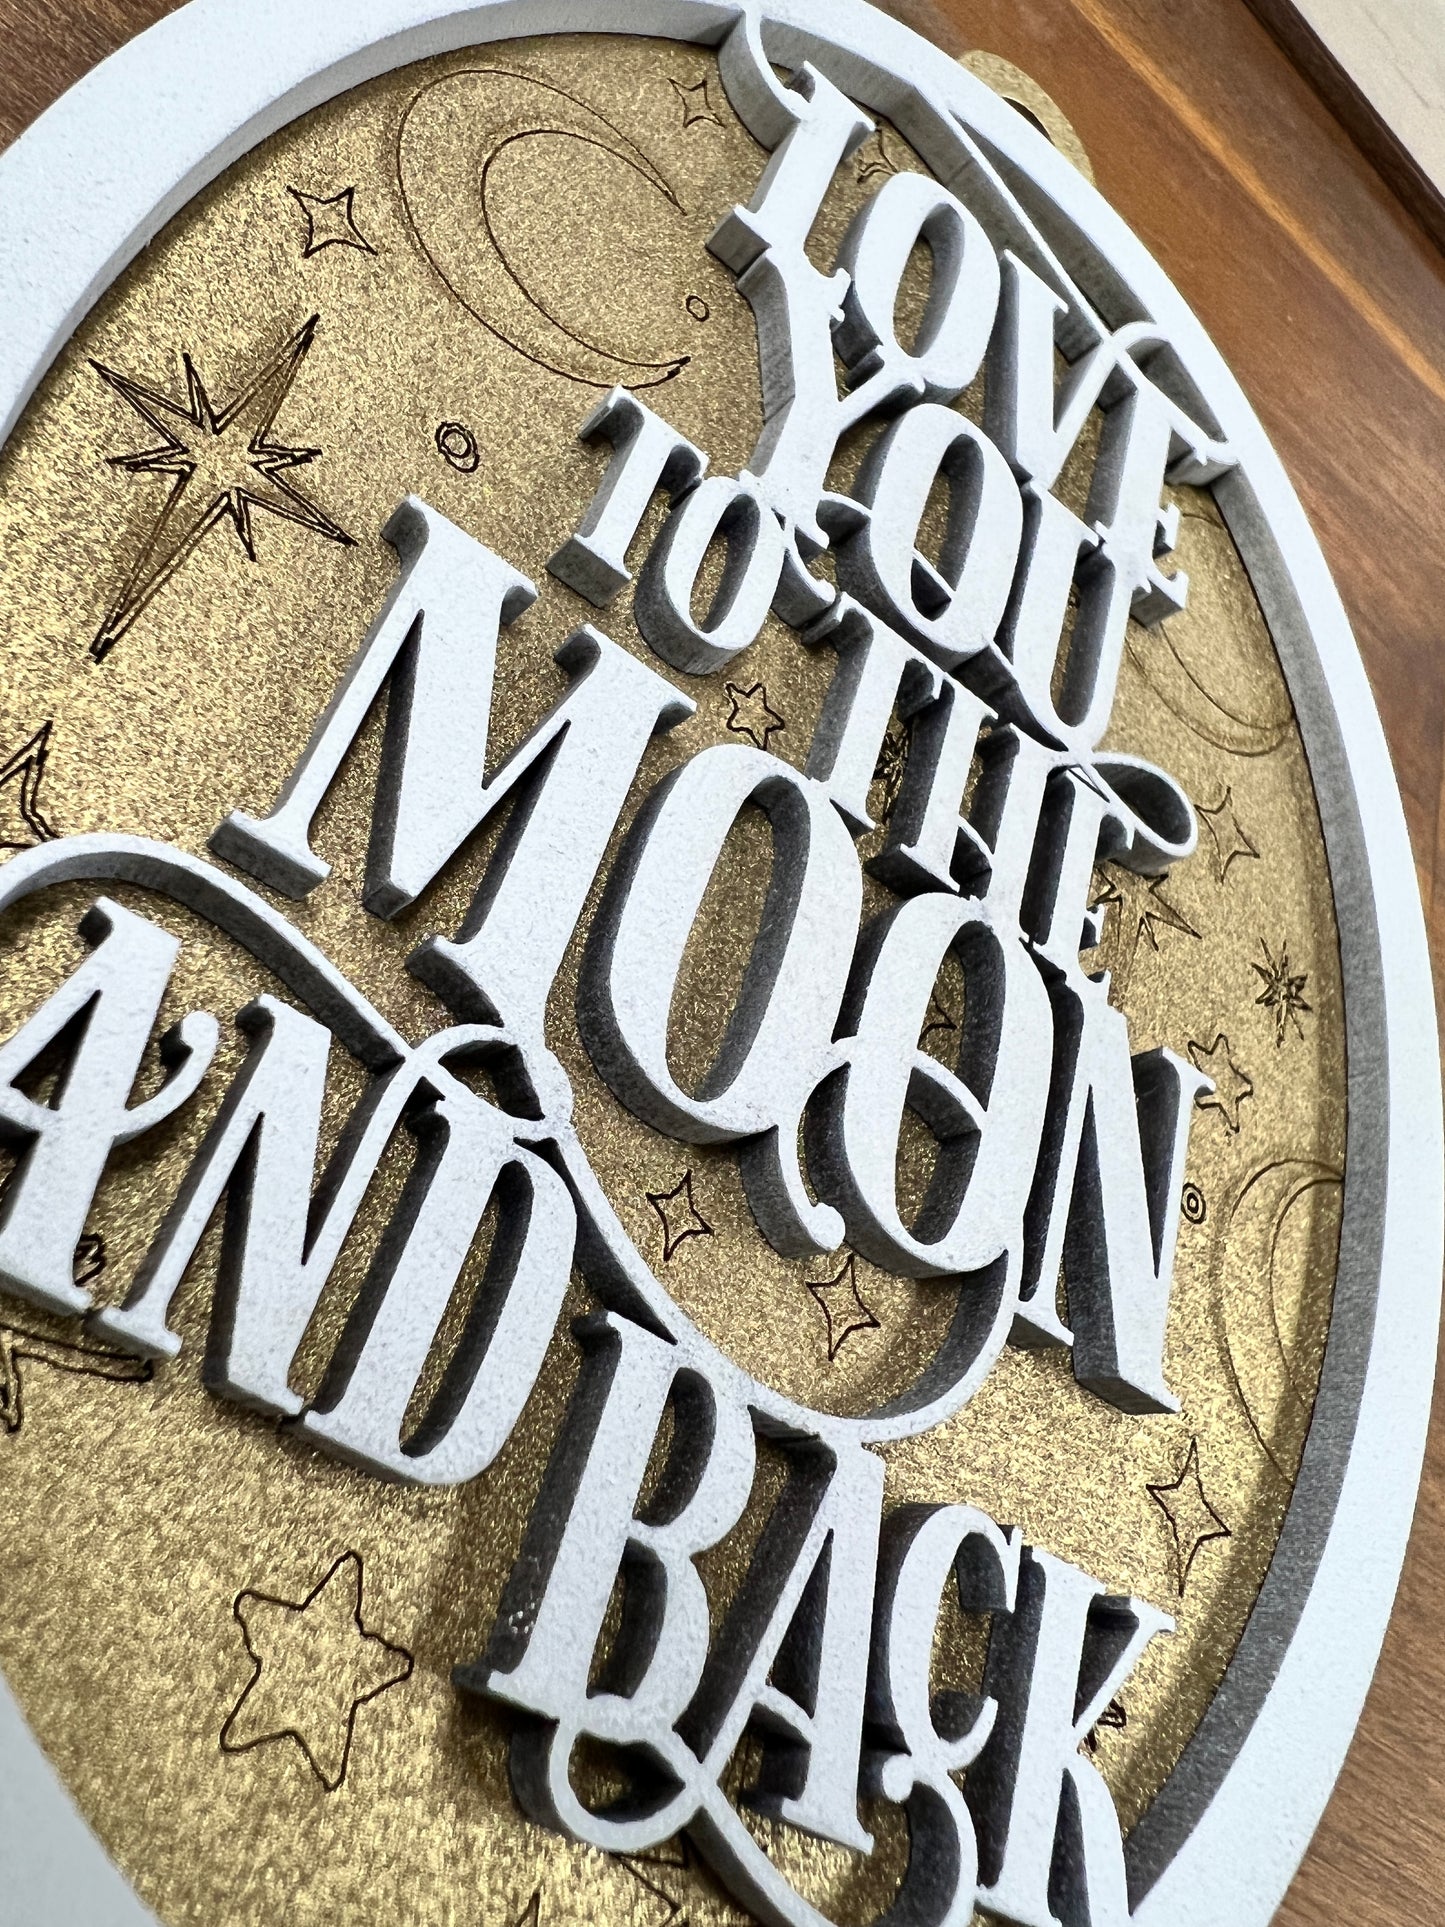 Ornament SVG File Glowforge Ready Laser: Love you to the Moon and Back